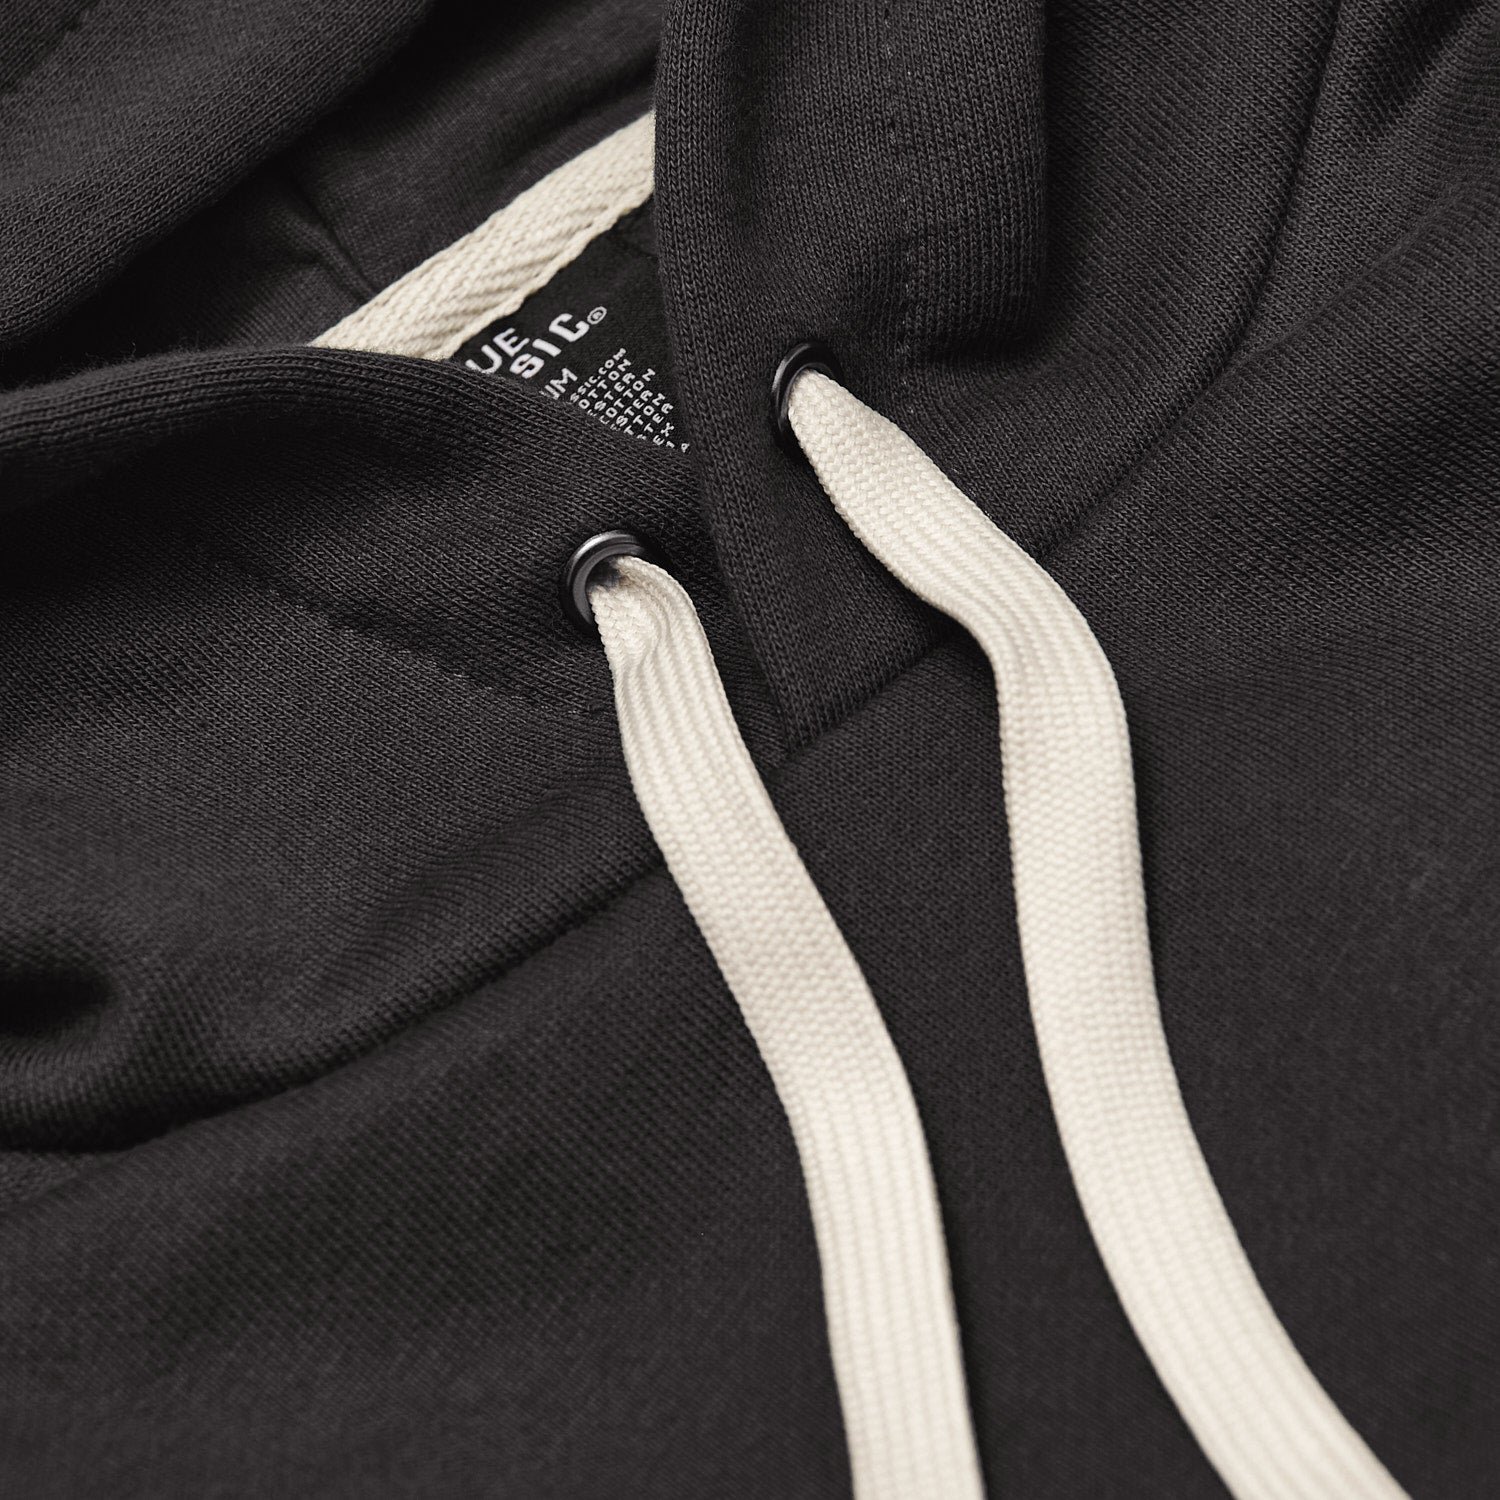 Carbon Fleece French Terry Pullover Hoodie